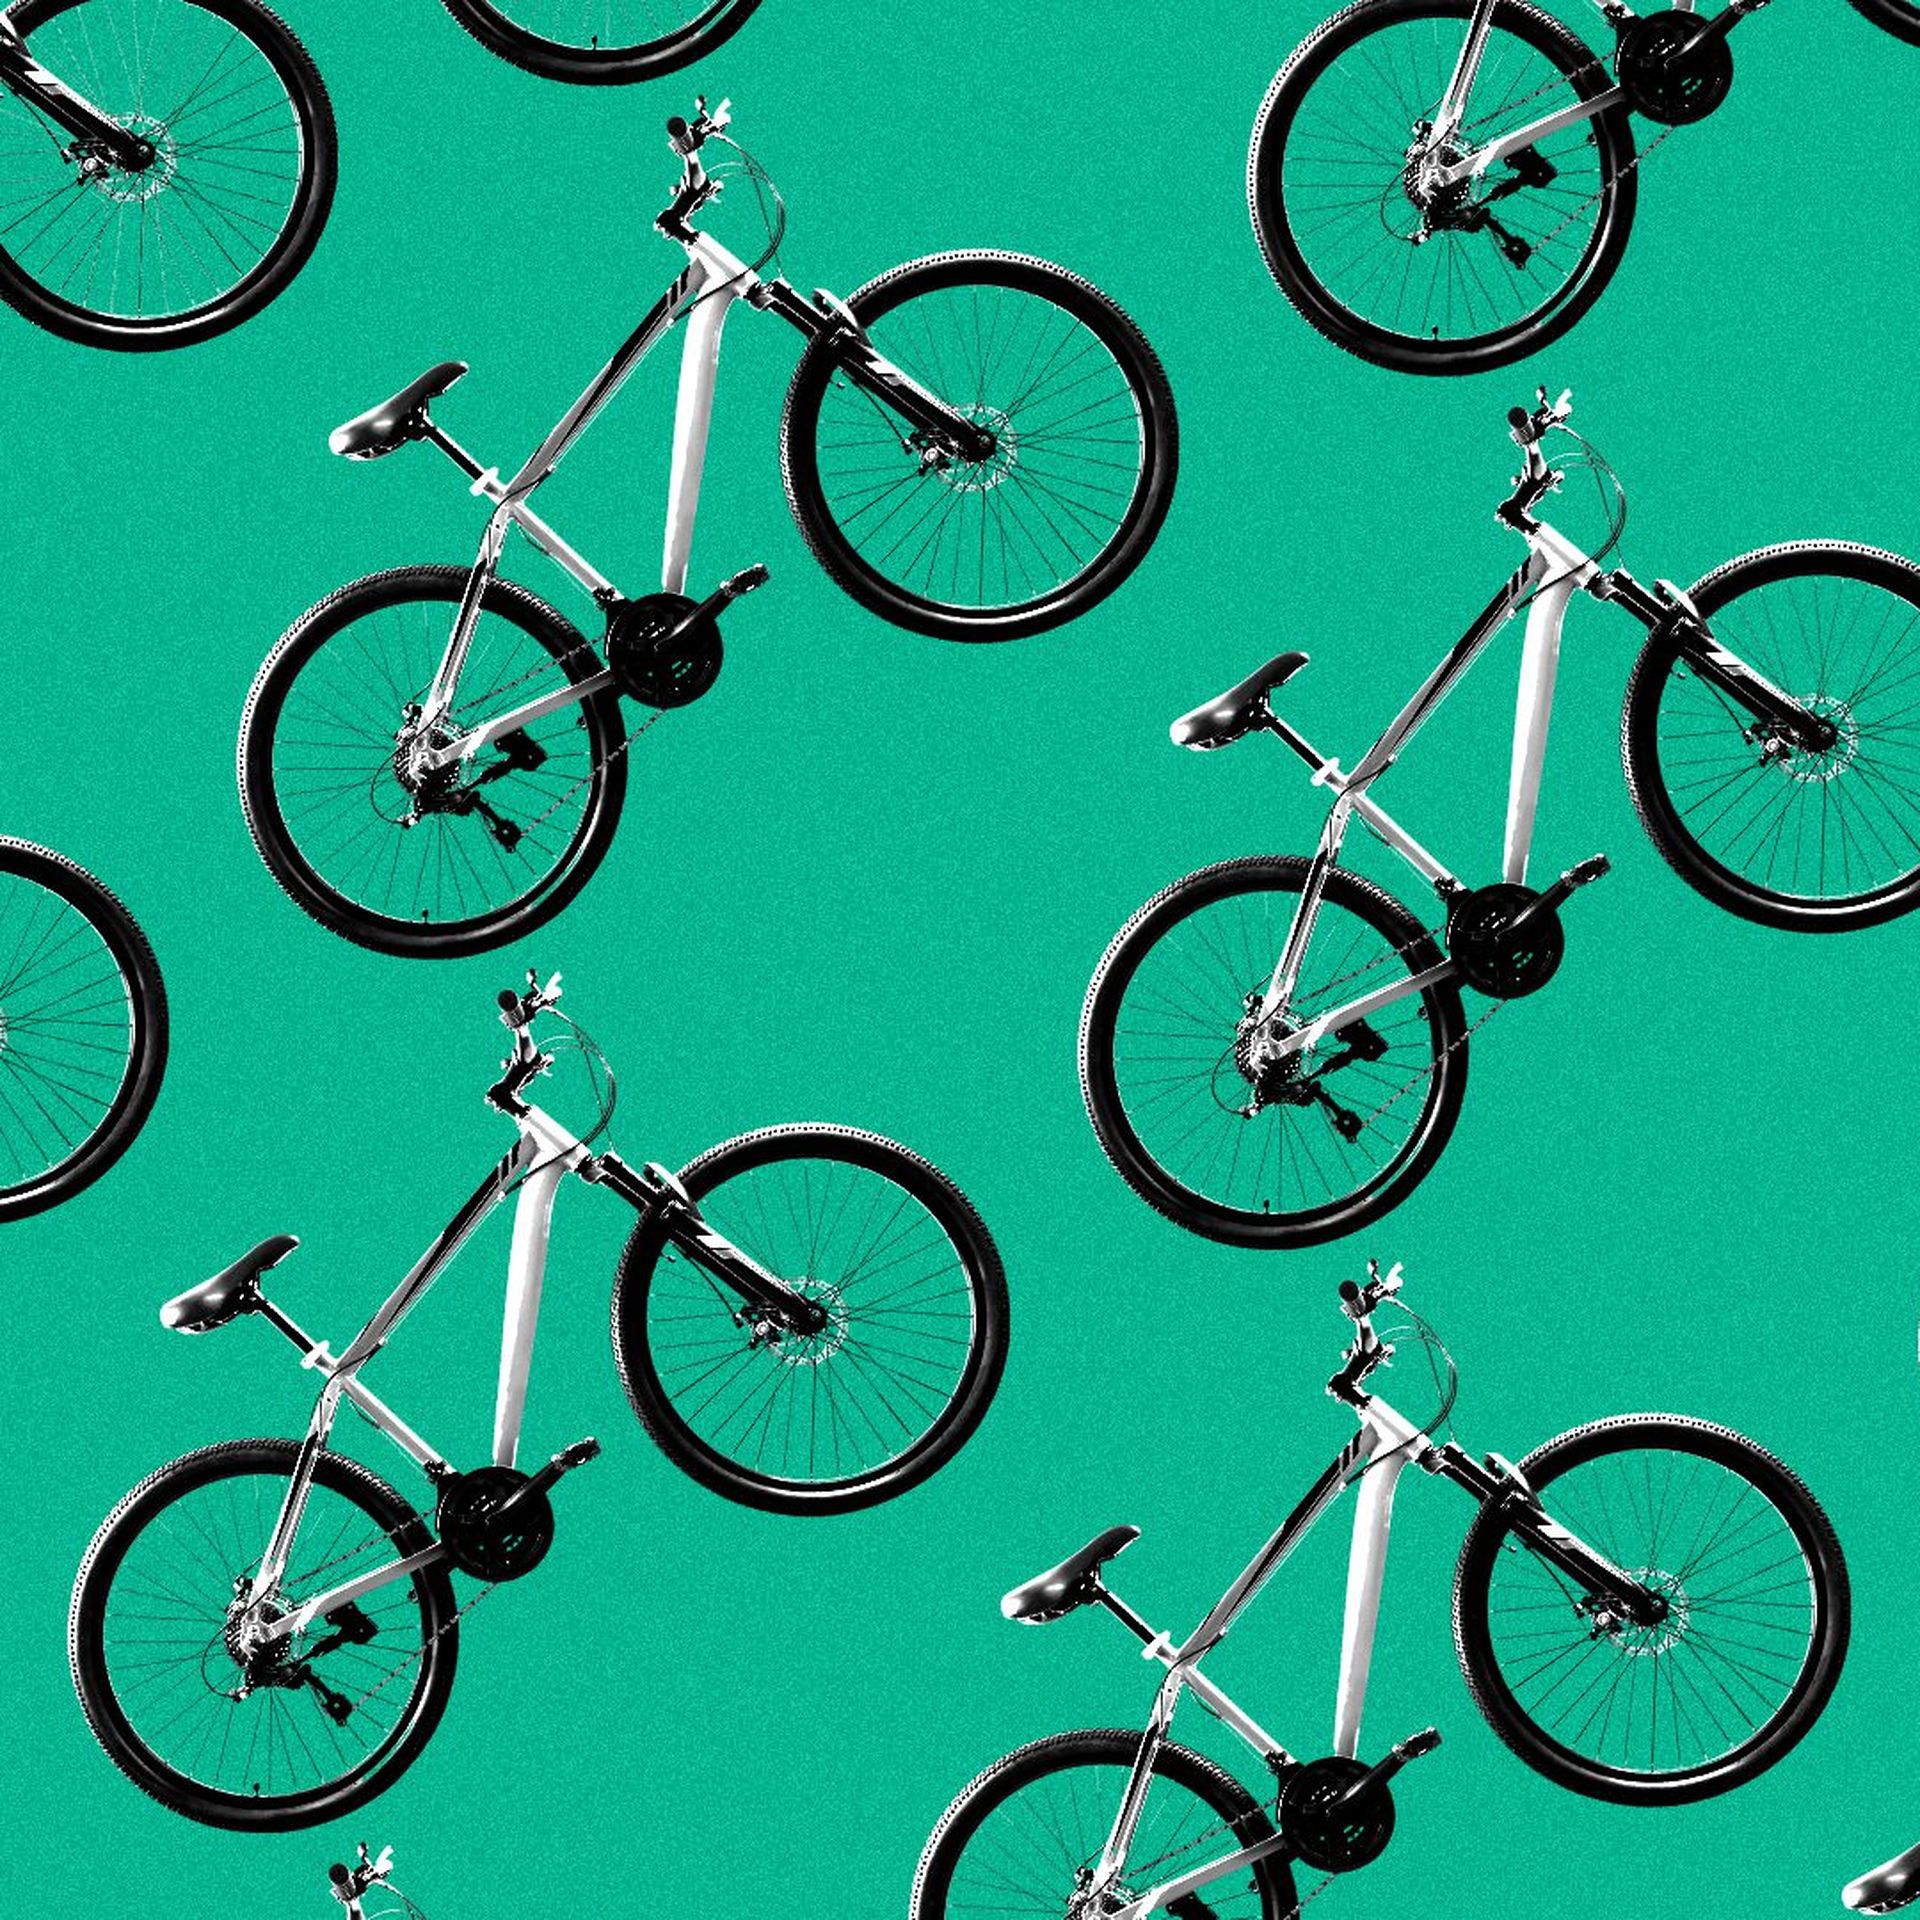 Illustration of a pattern of bicycles.